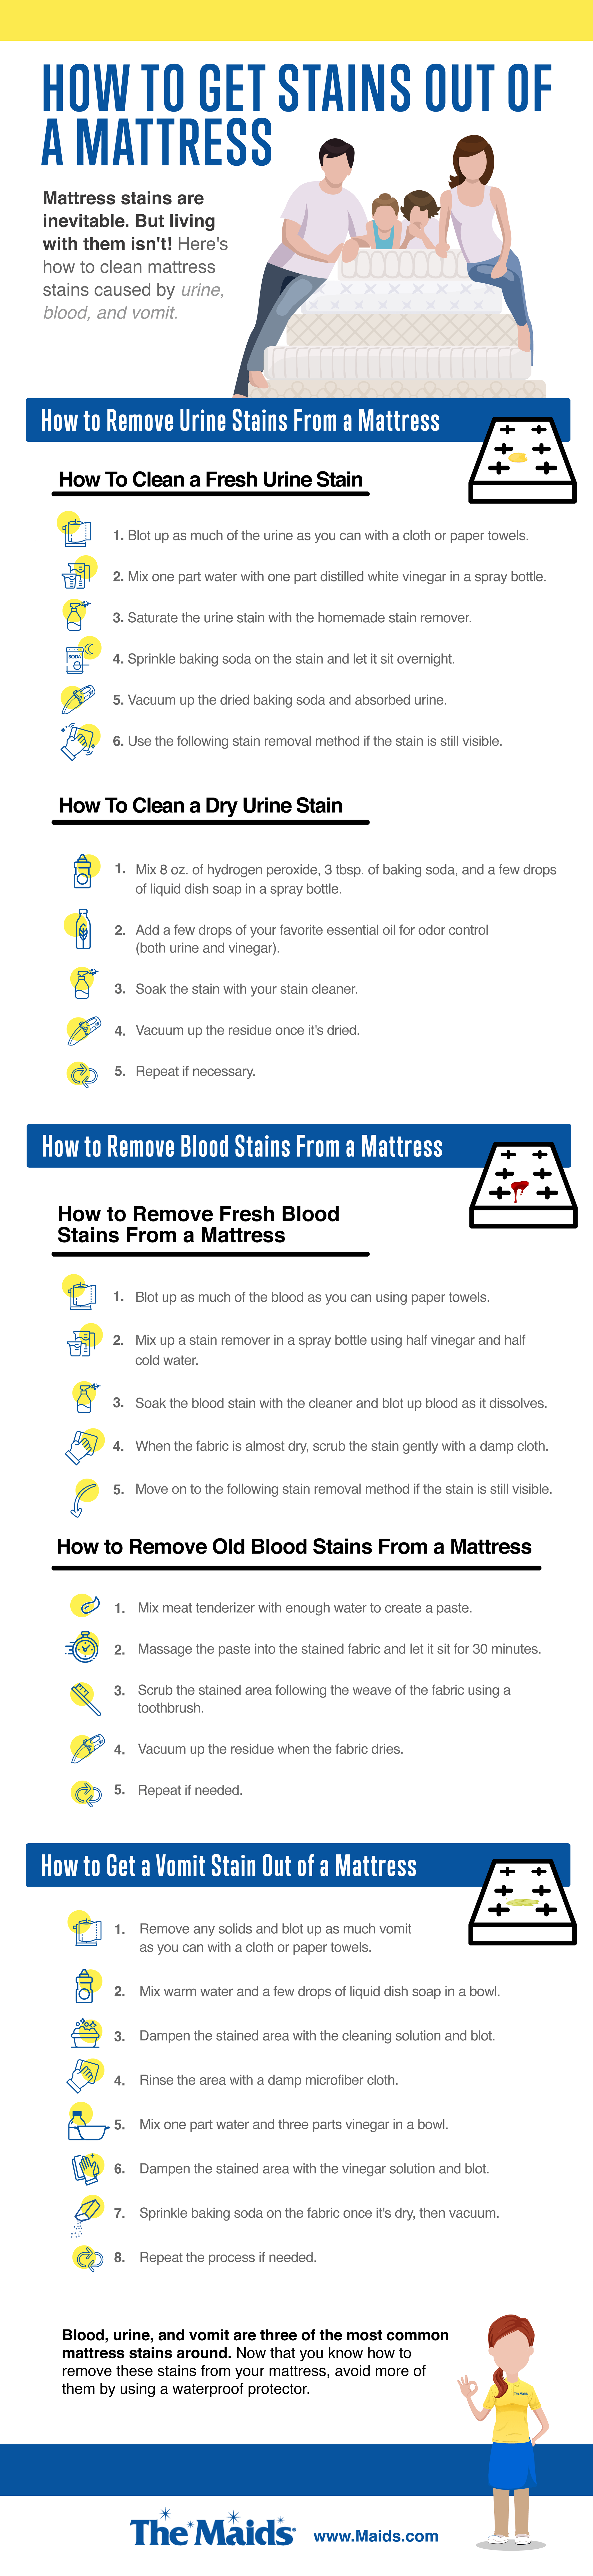 Infographic - How to Get Stains Out of A Mattress